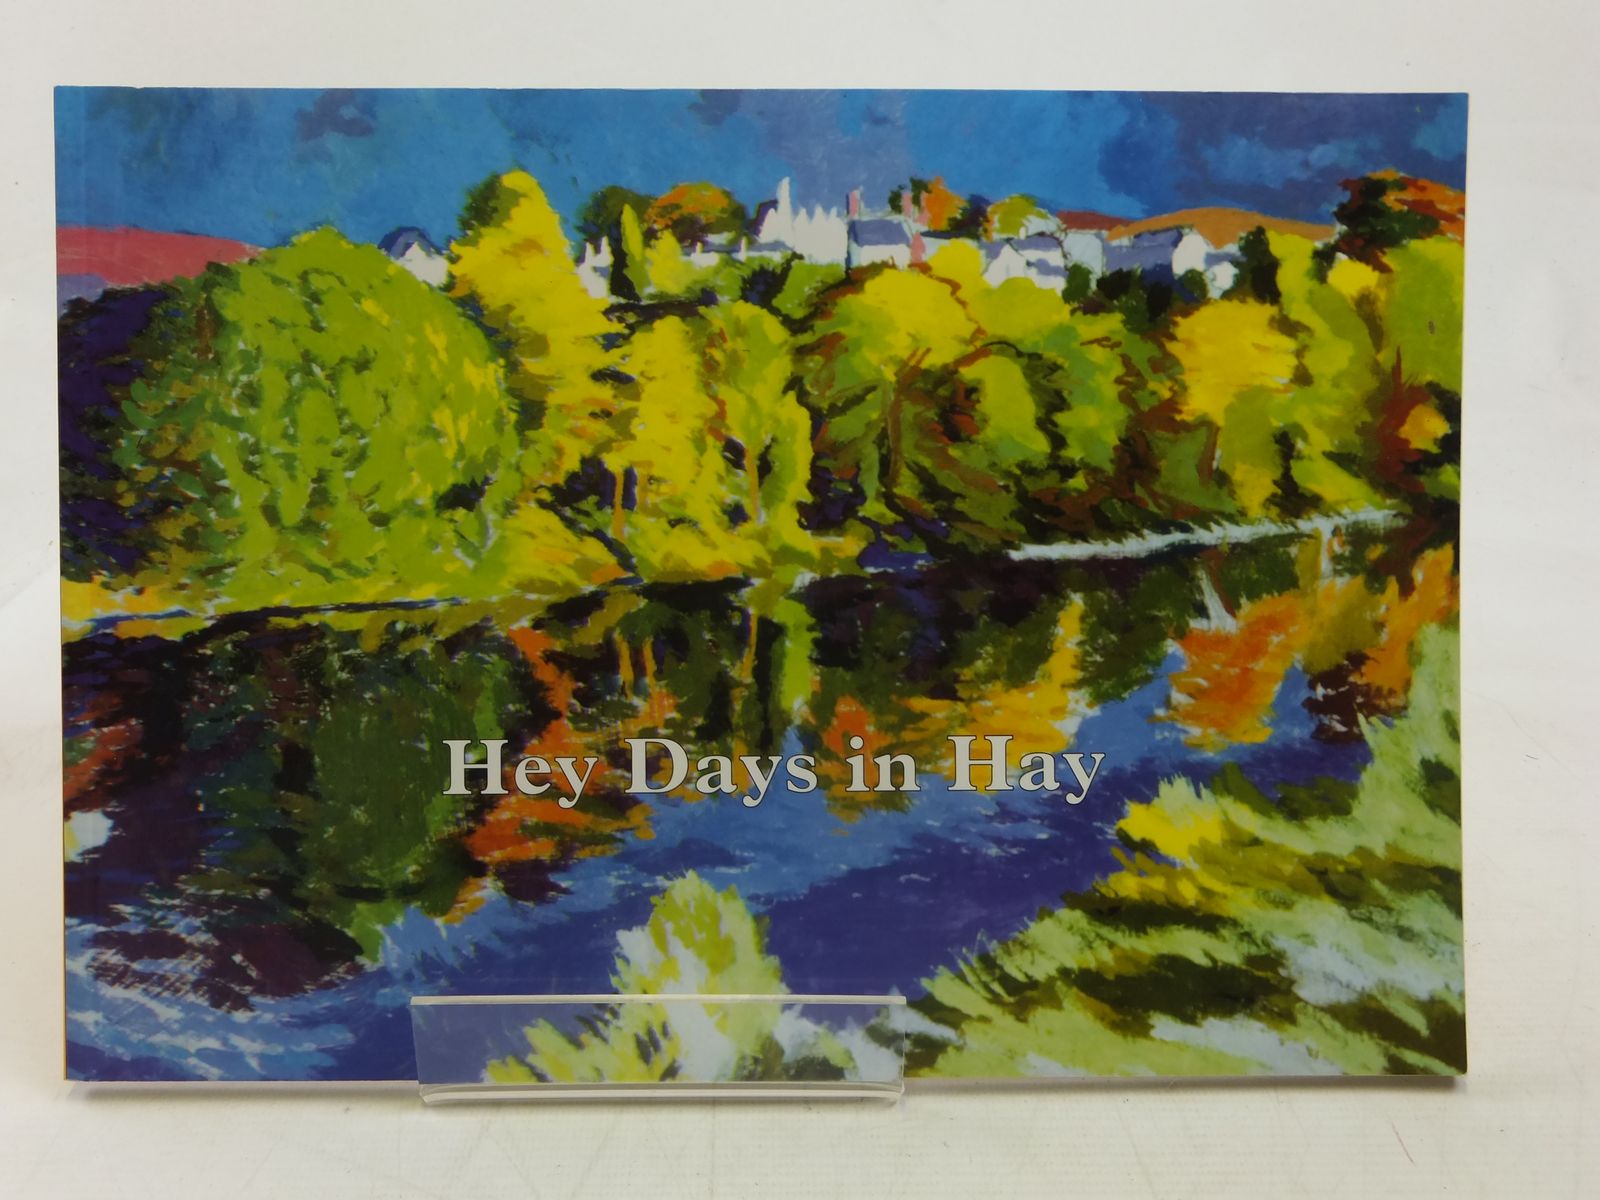 Photo of HEY DAYS IN HAY LLAWENDDYDD YN Y GELLI written by Fisk, Eugene Sandford, Jeremy illustrated by Fisk, Eugene published by The Fitzponce Press (STOCK CODE: 2116546)  for sale by Stella & Rose's Books